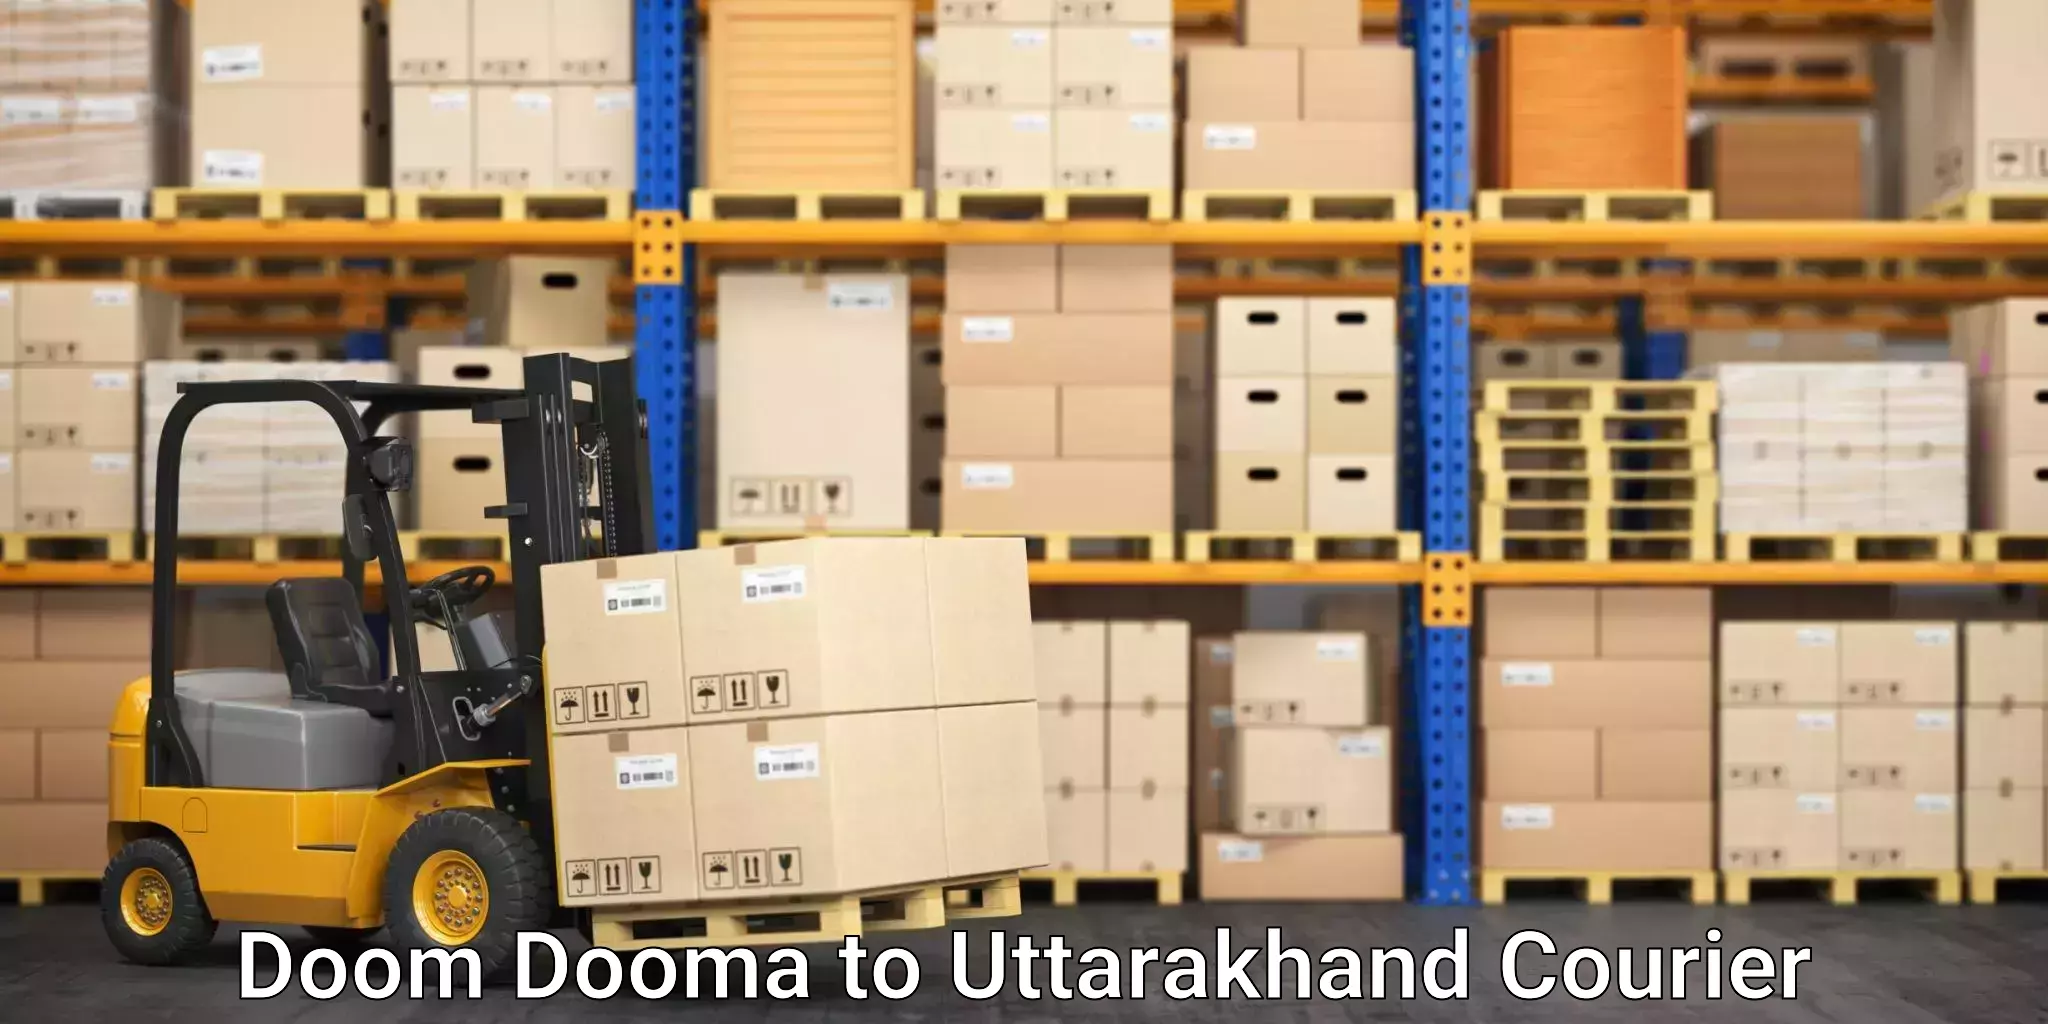 Round-the-clock parcel delivery Doom Dooma to Tehri Garhwal